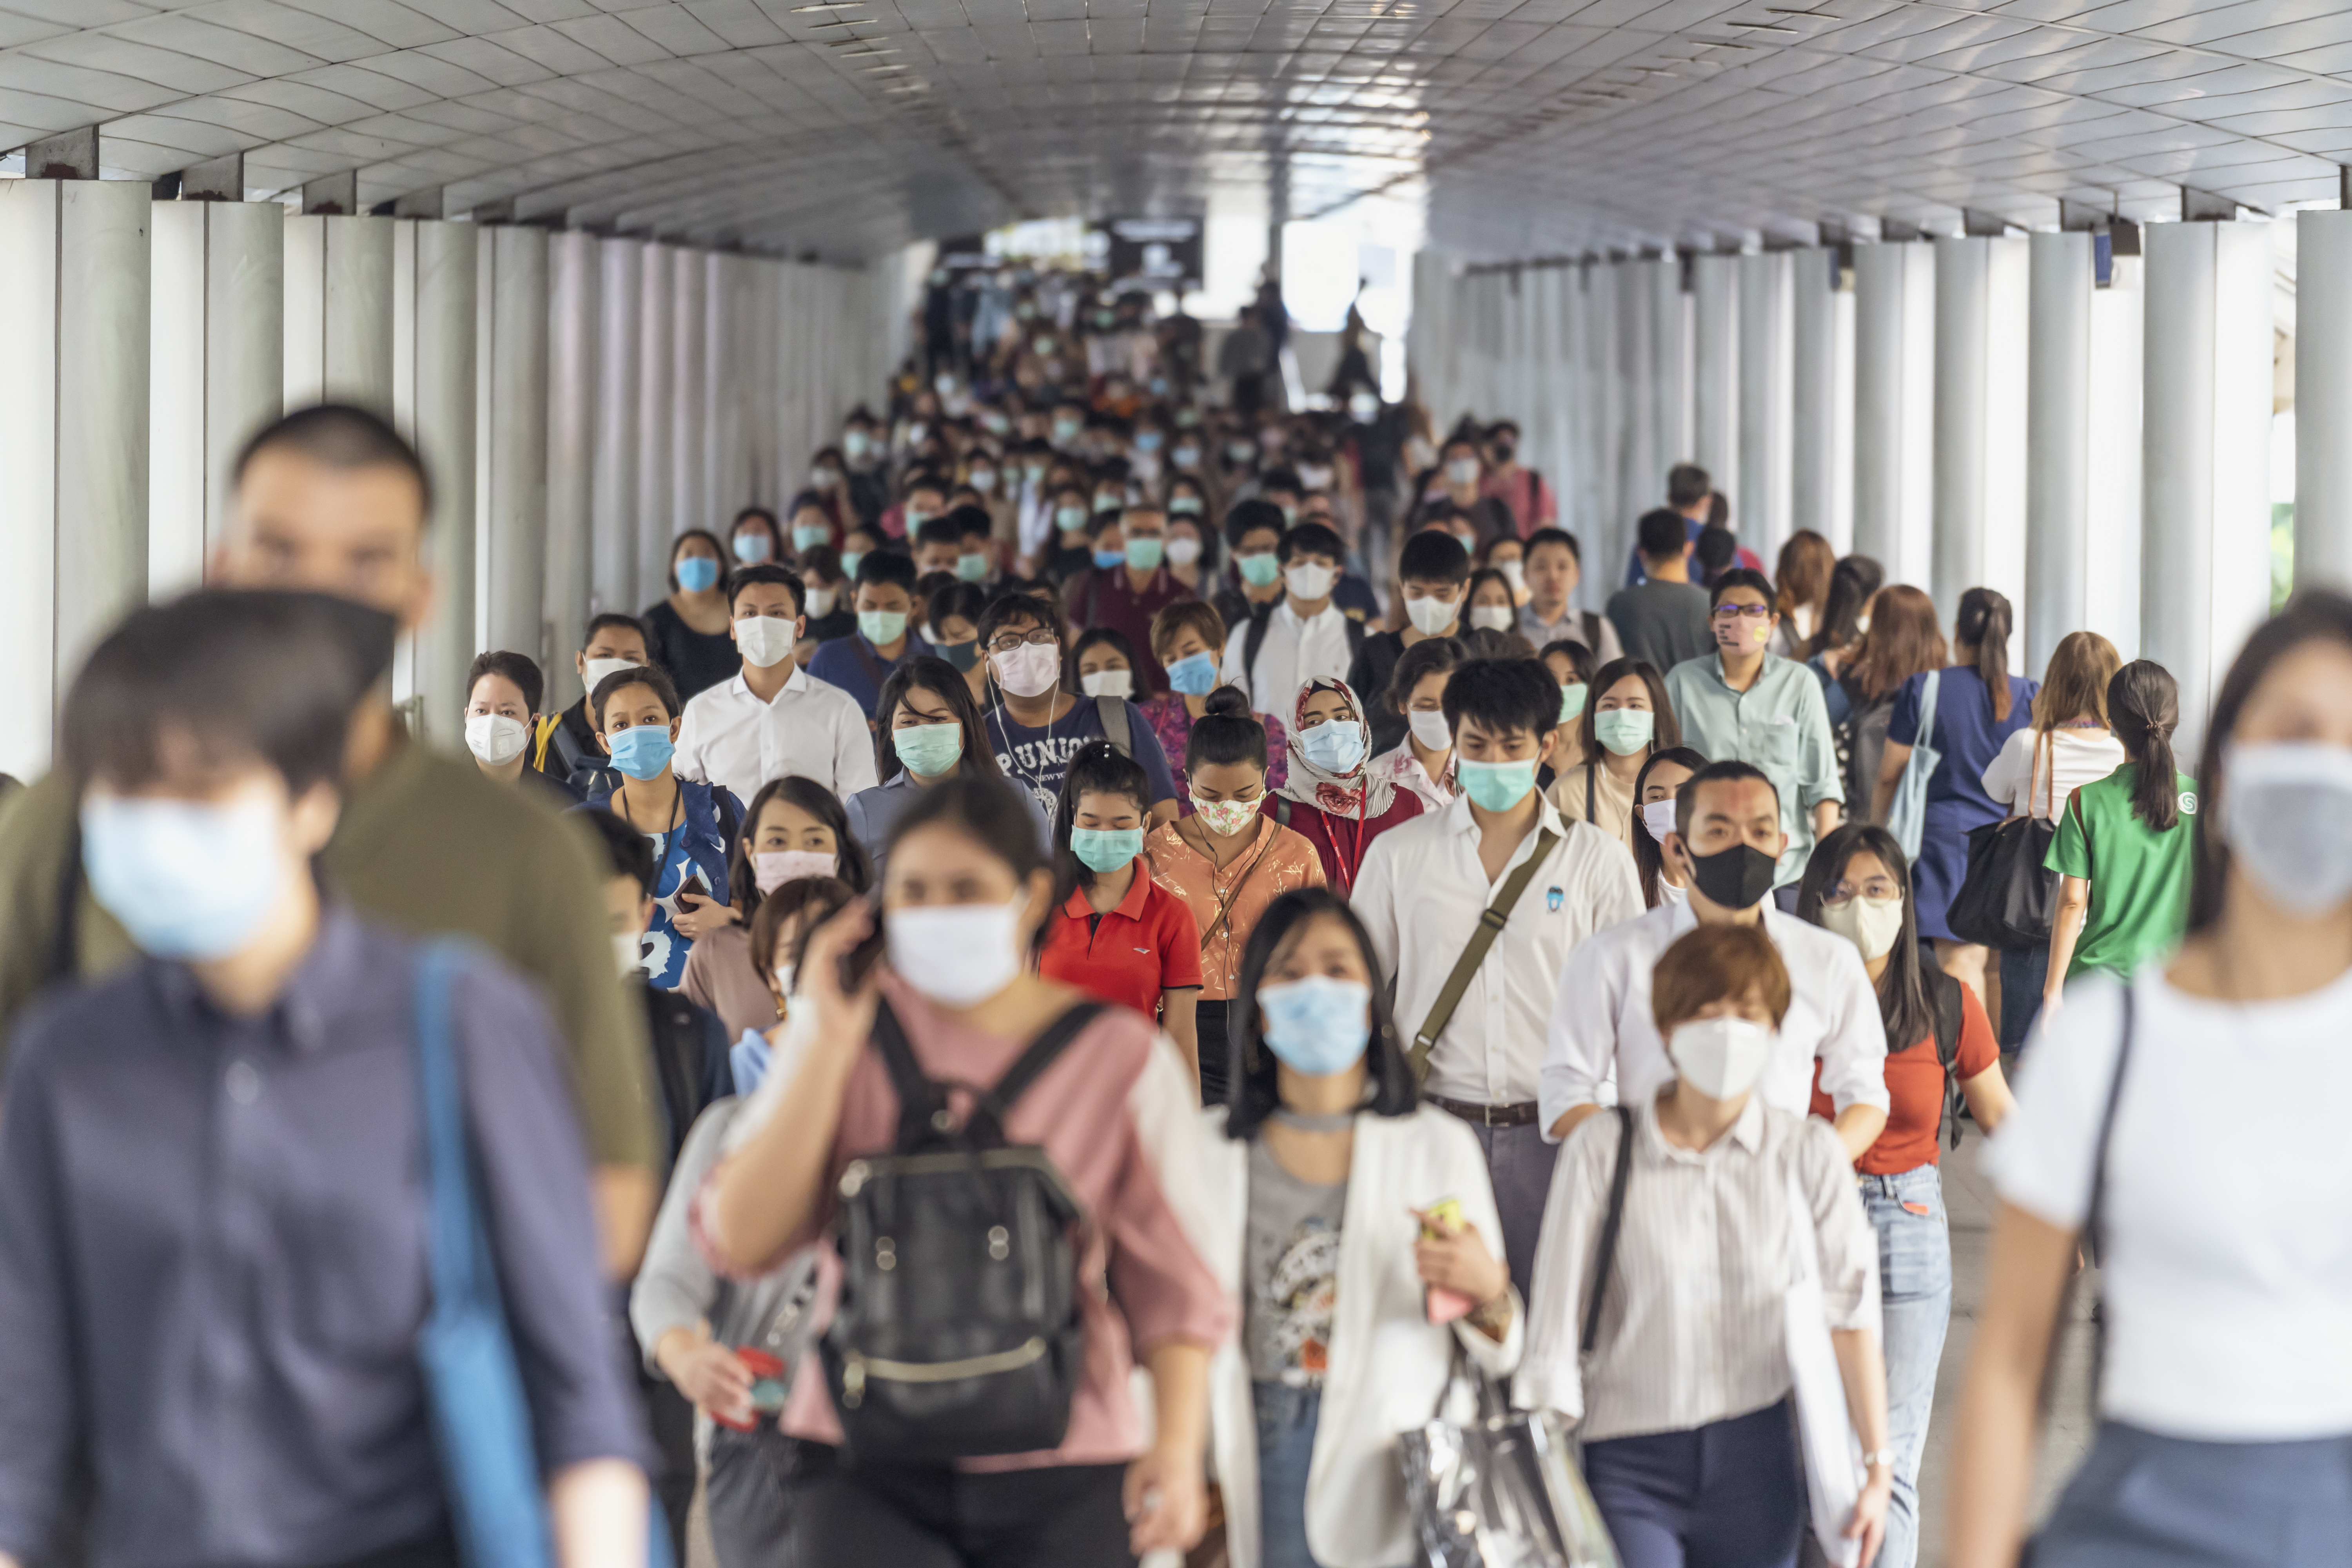 Photo showing a large group of people all wearing surgical masks